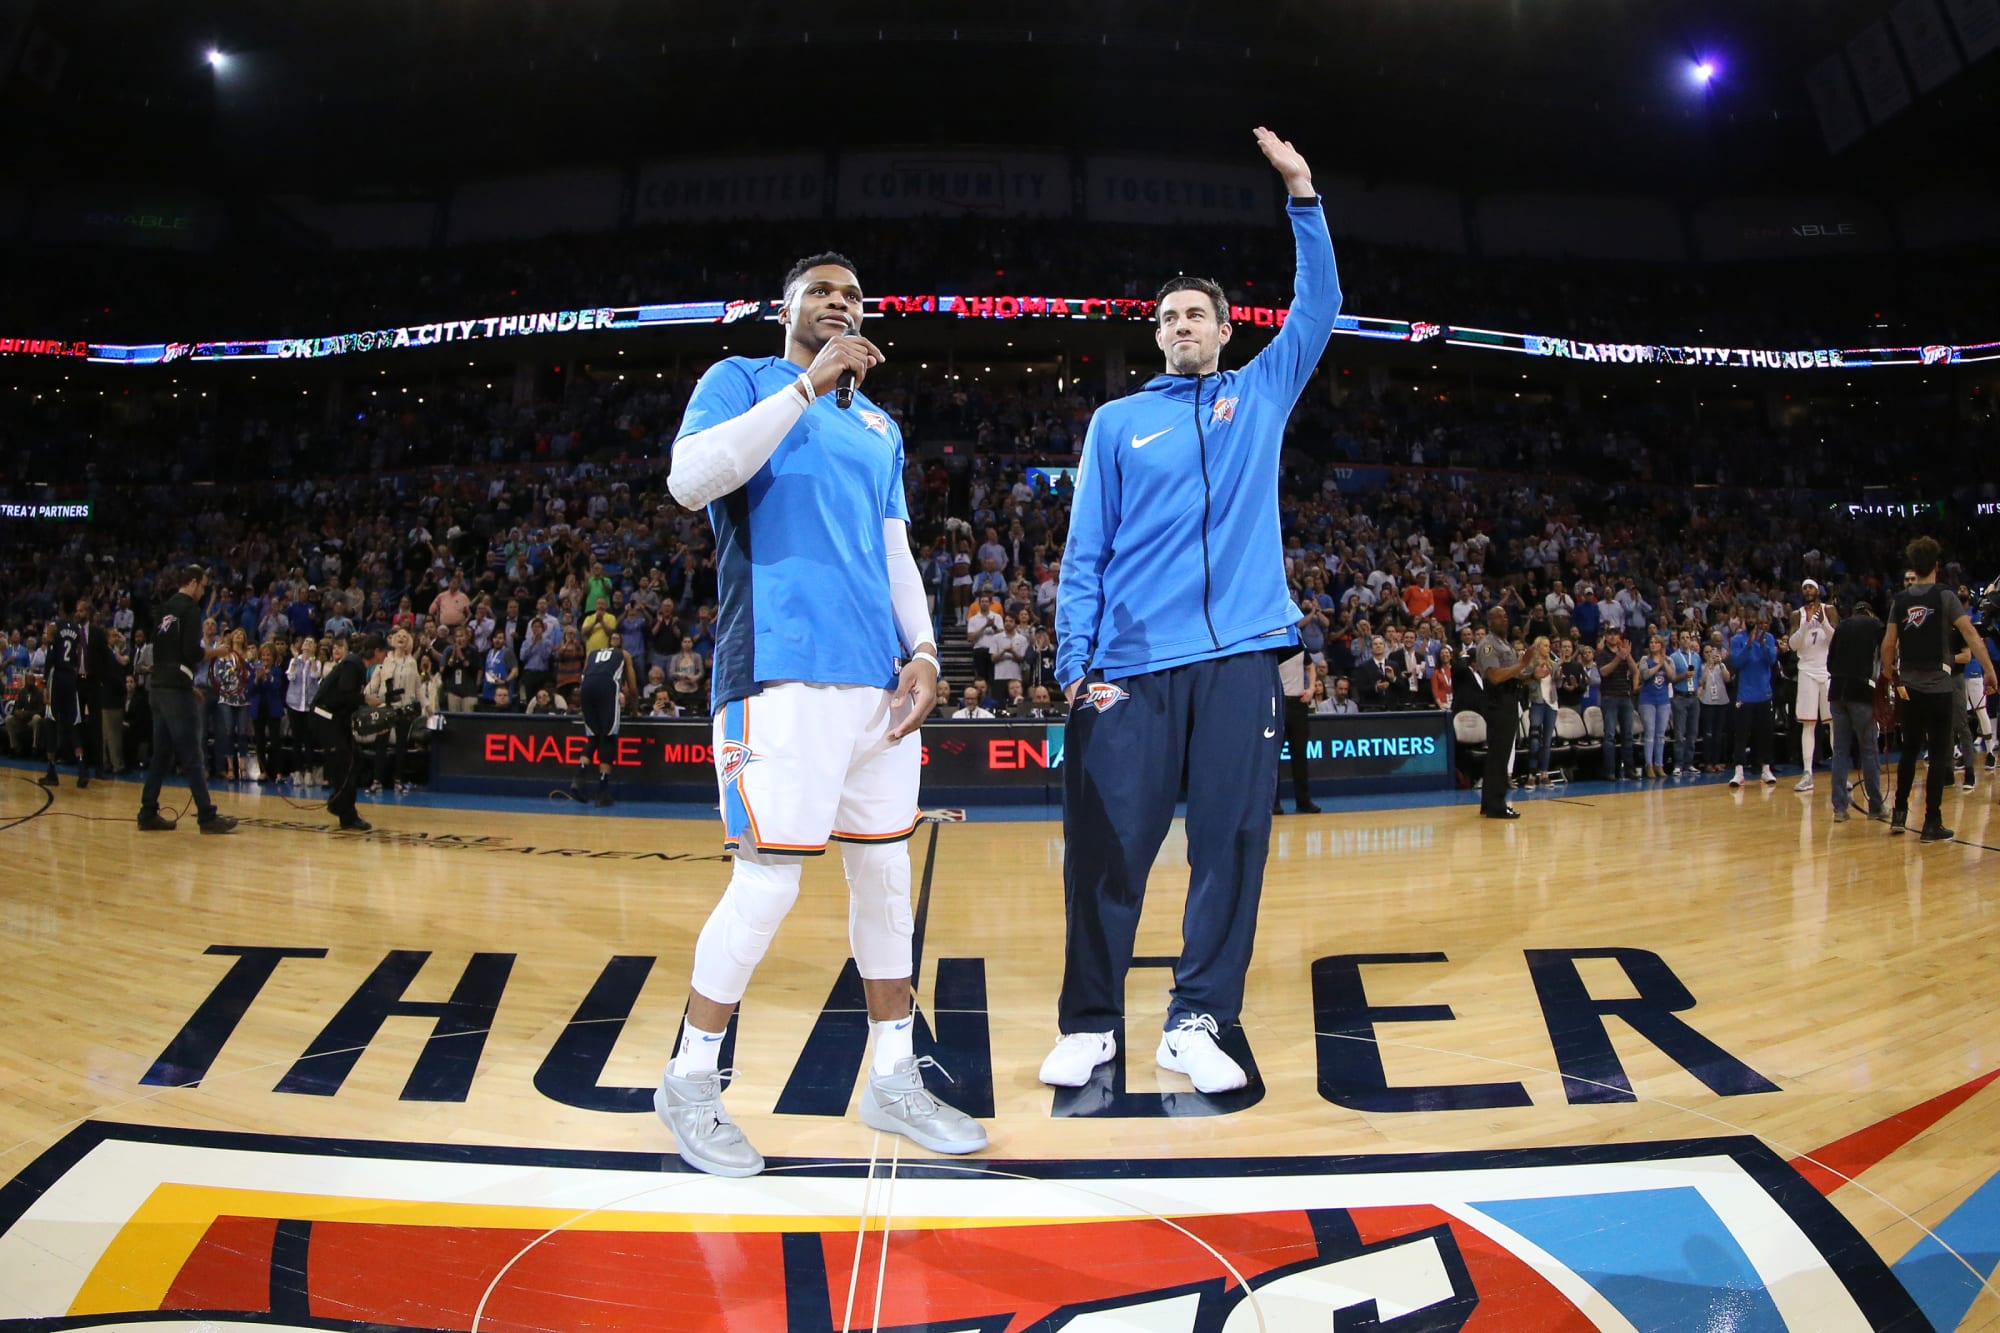 The Q&A with Thunder player Nick Collison